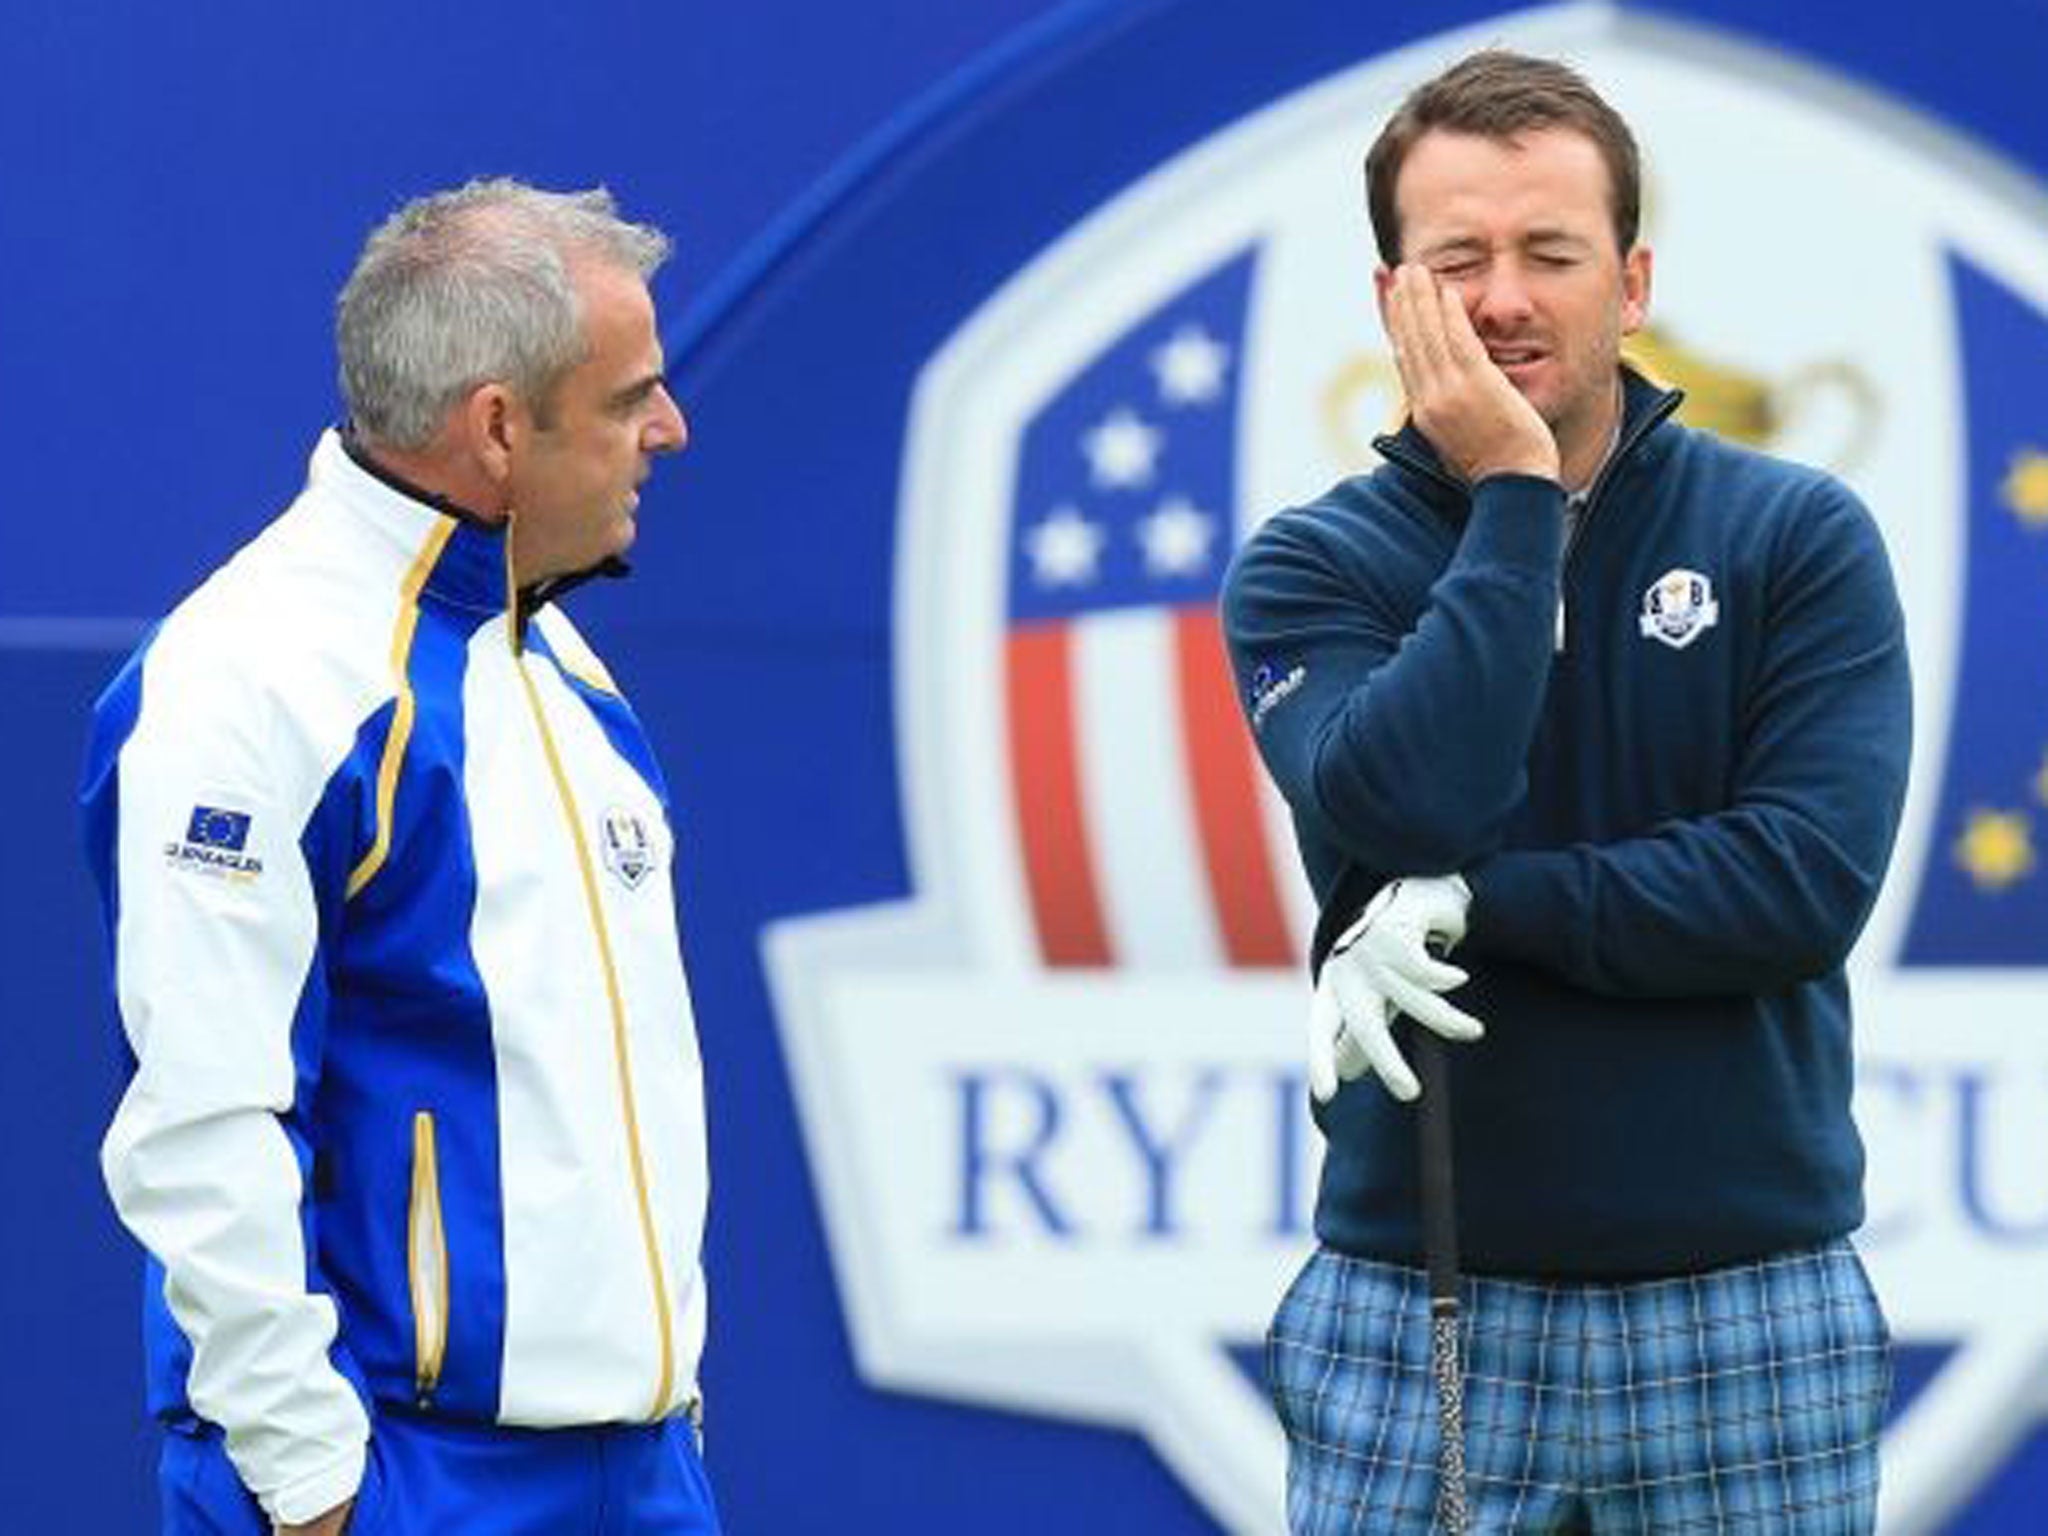 The Europe captain, Paul McGinley (left), and Graeme McDowell during a practice session at Gleneagles